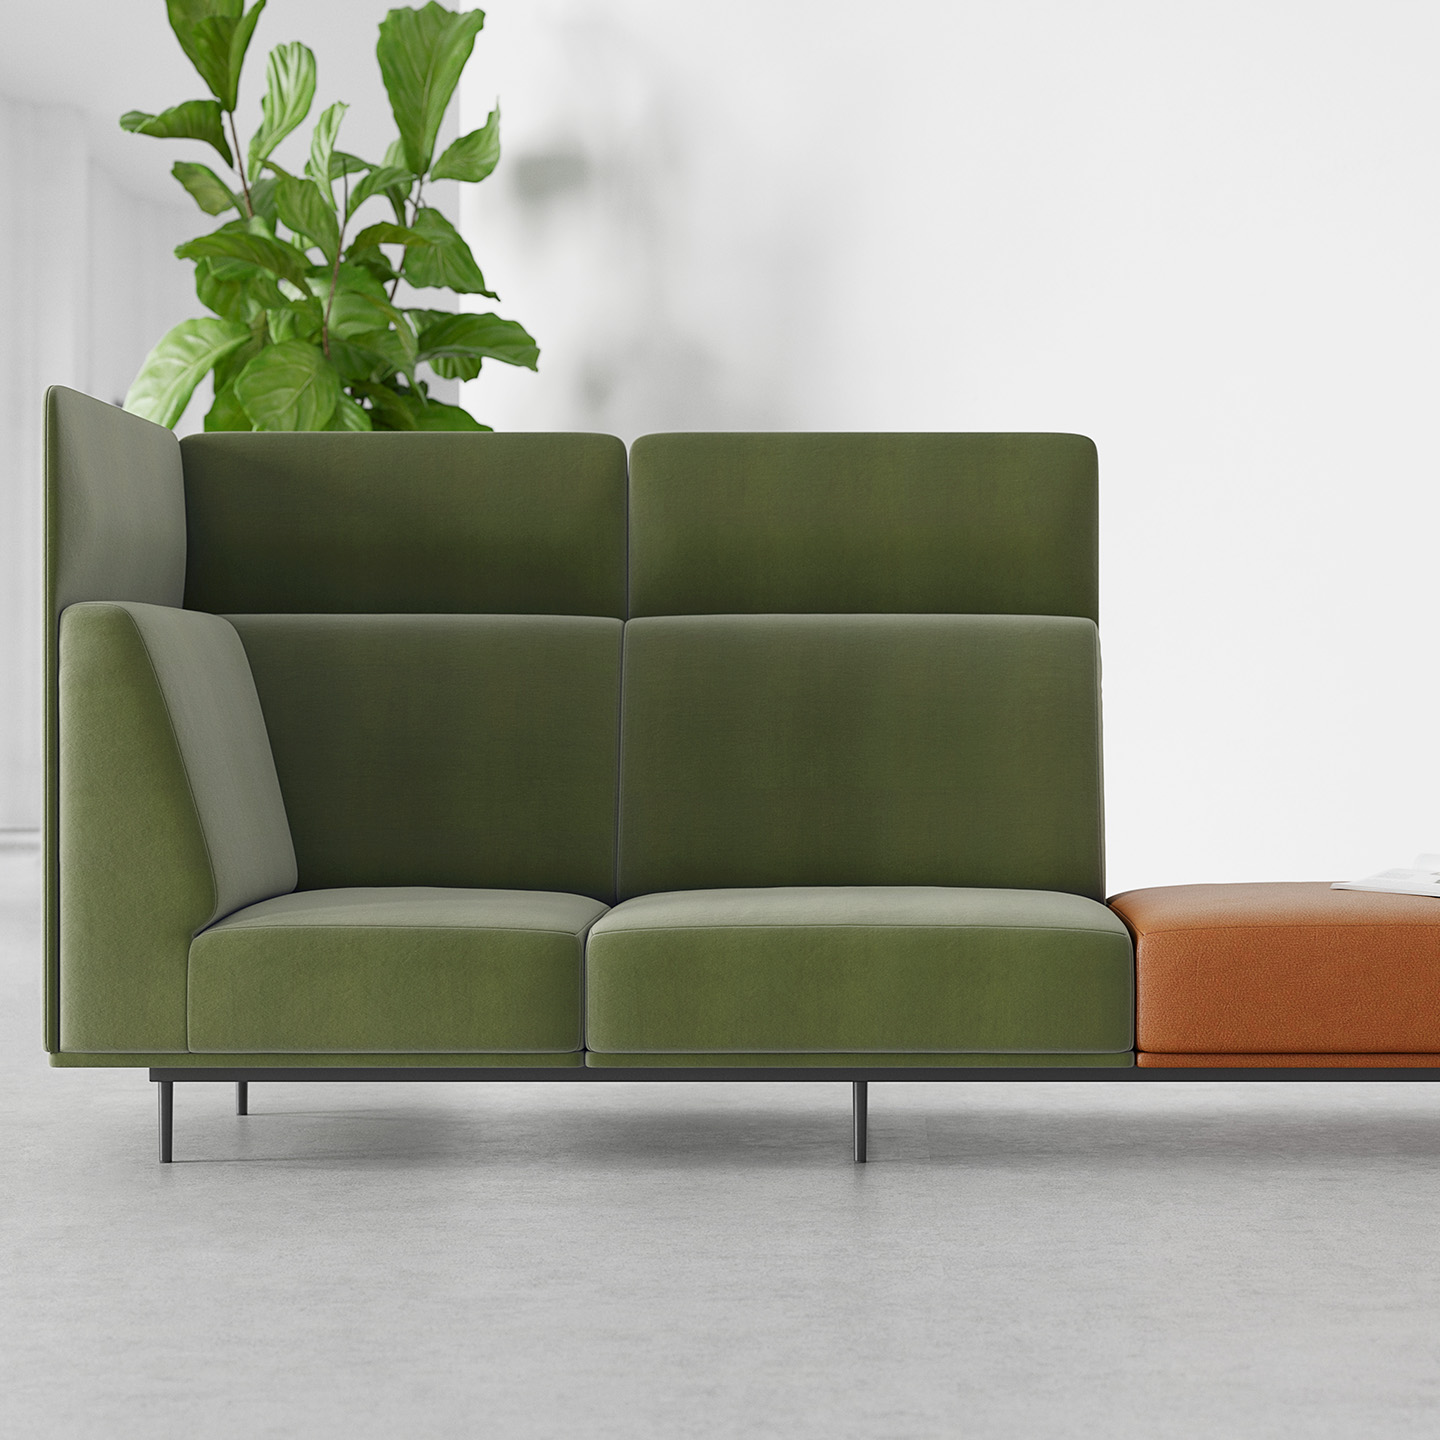 Toulouse sofas from BoConcept